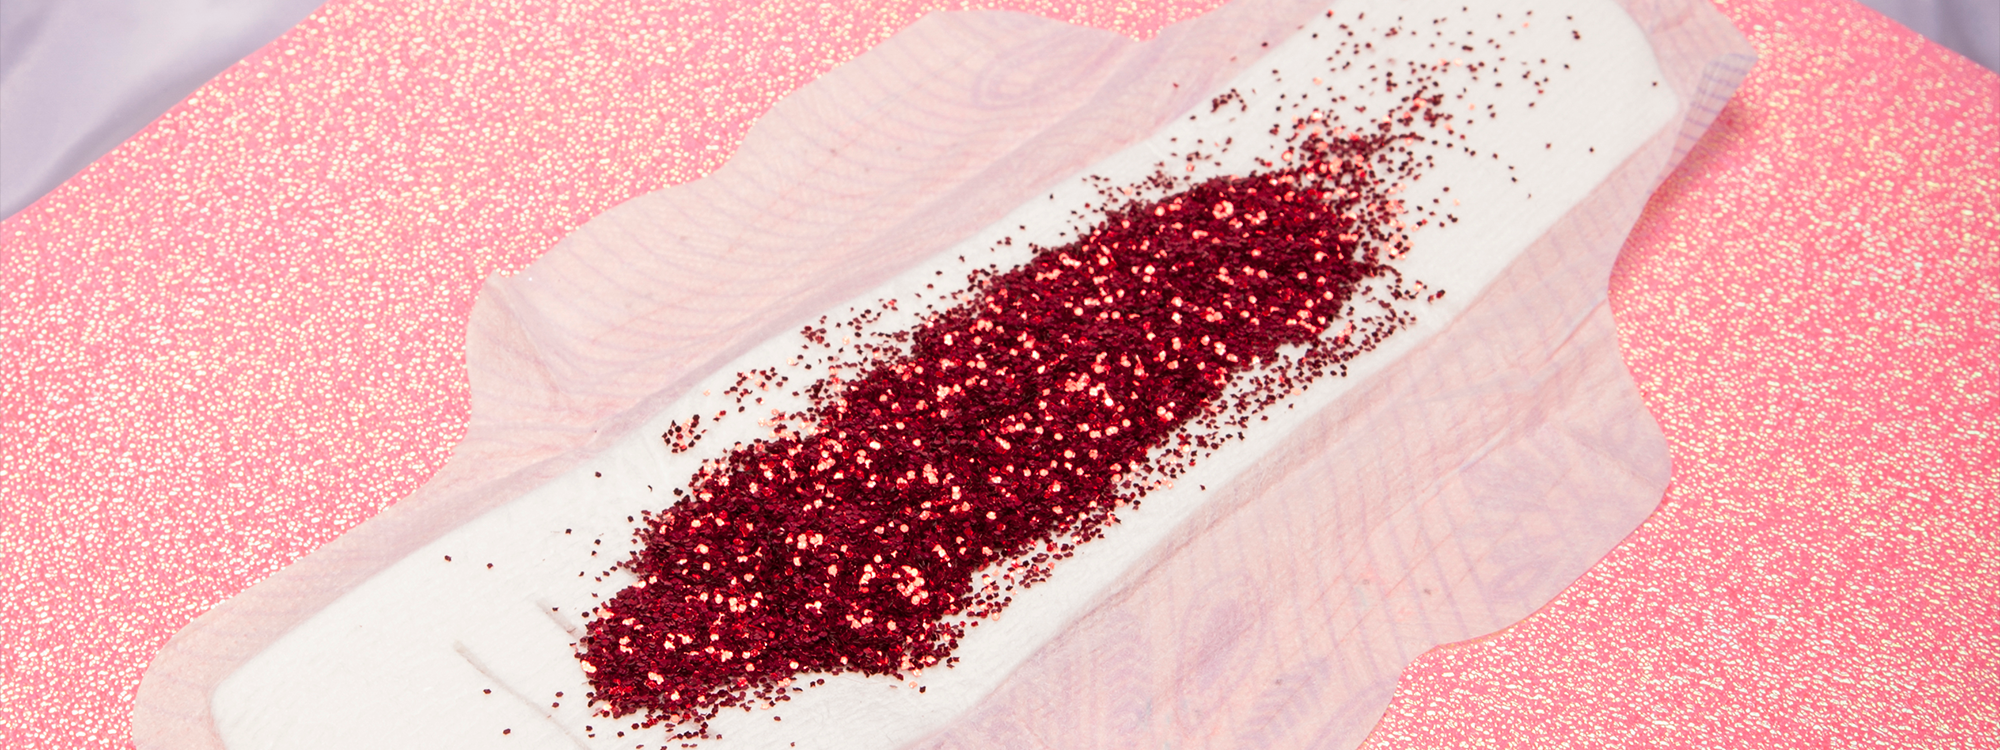 Gynaecologists Fear Trend Of Women Putting Glitter In Their Vagina